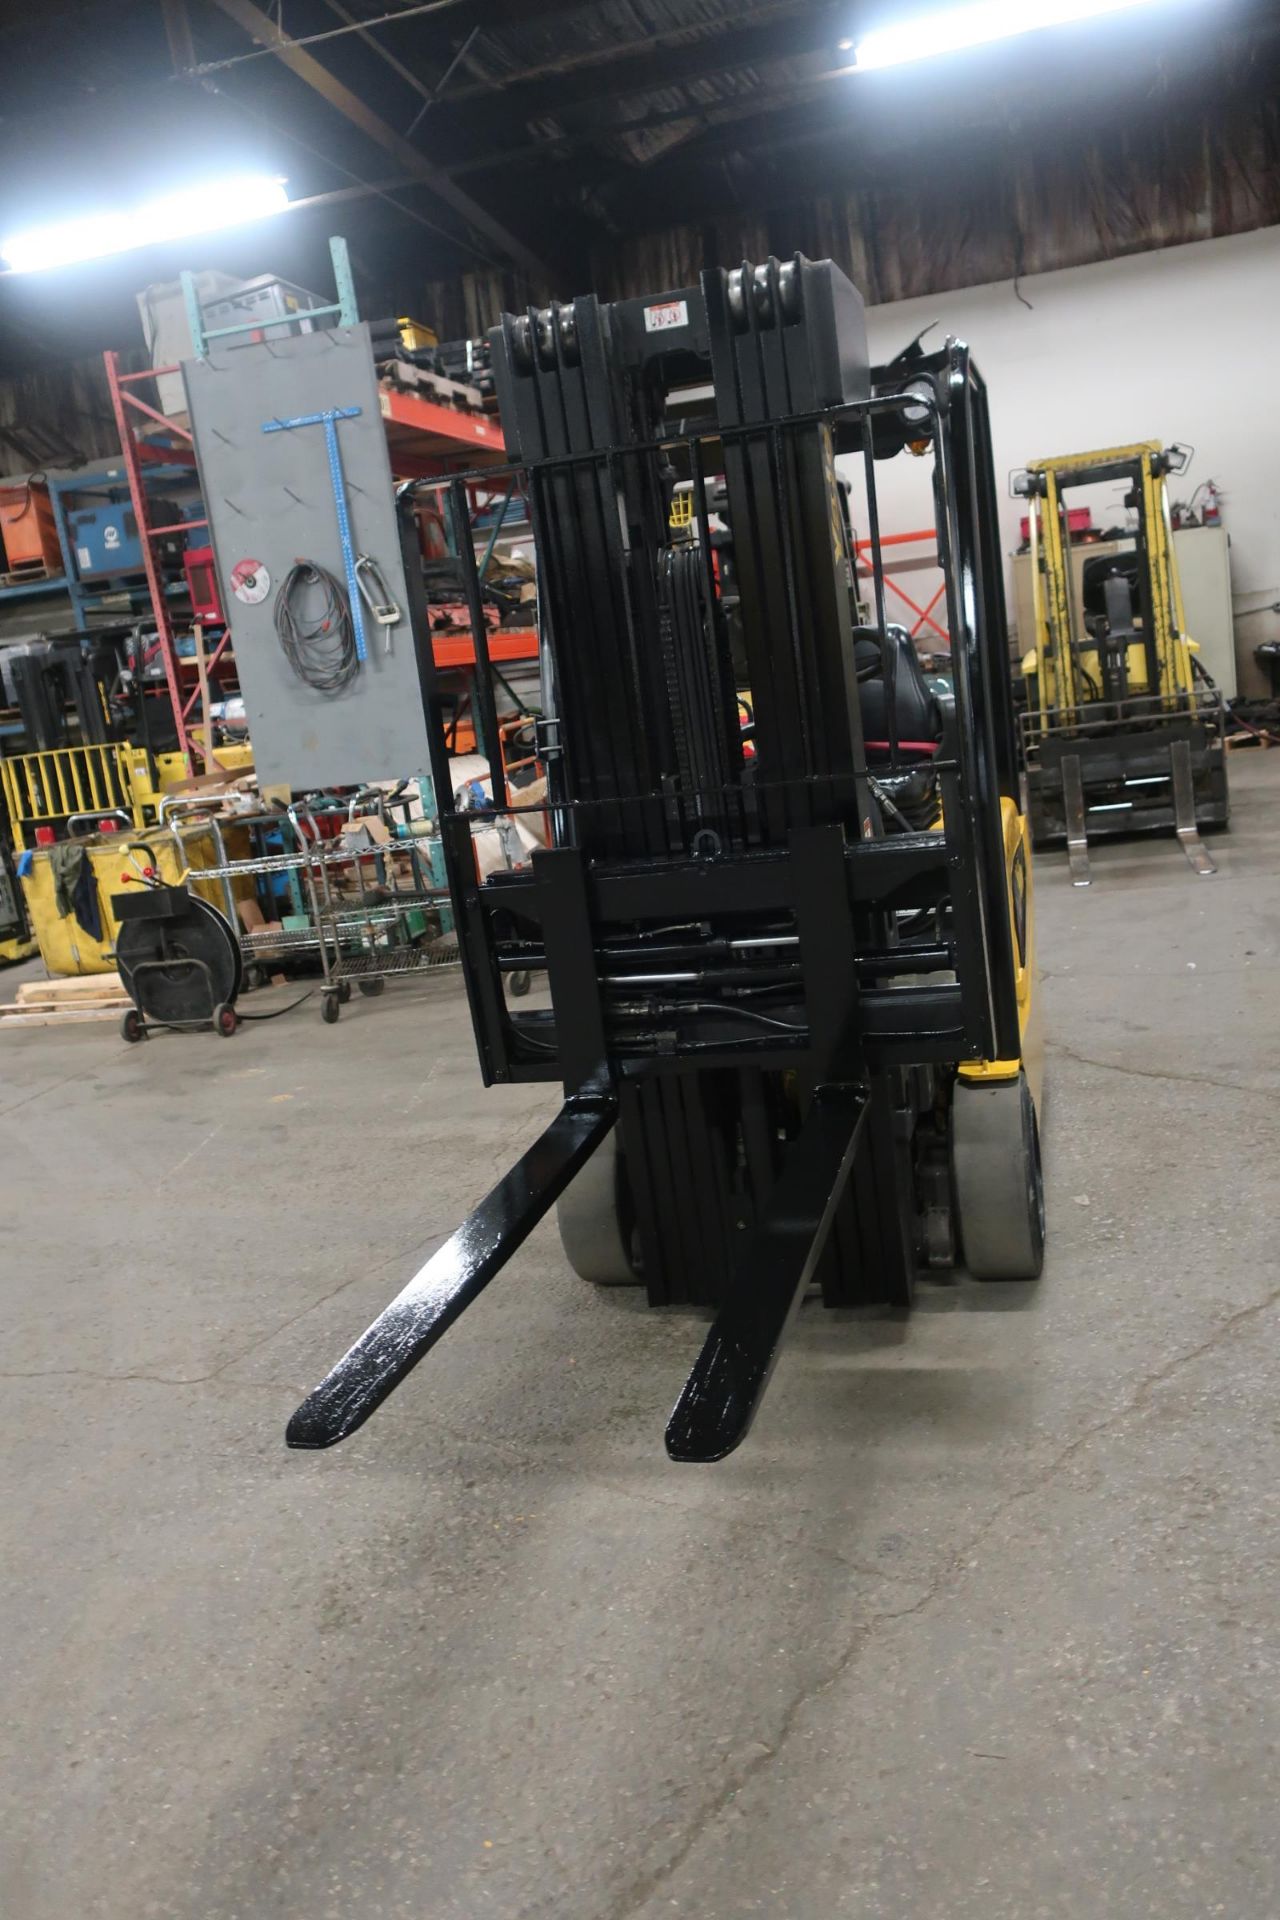 FREE CUSTOMS - 2014 Yale 3500lbs Forklift 3-Wheel unit with 4-stage Mast and Sideshift & Fork - Image 3 of 3